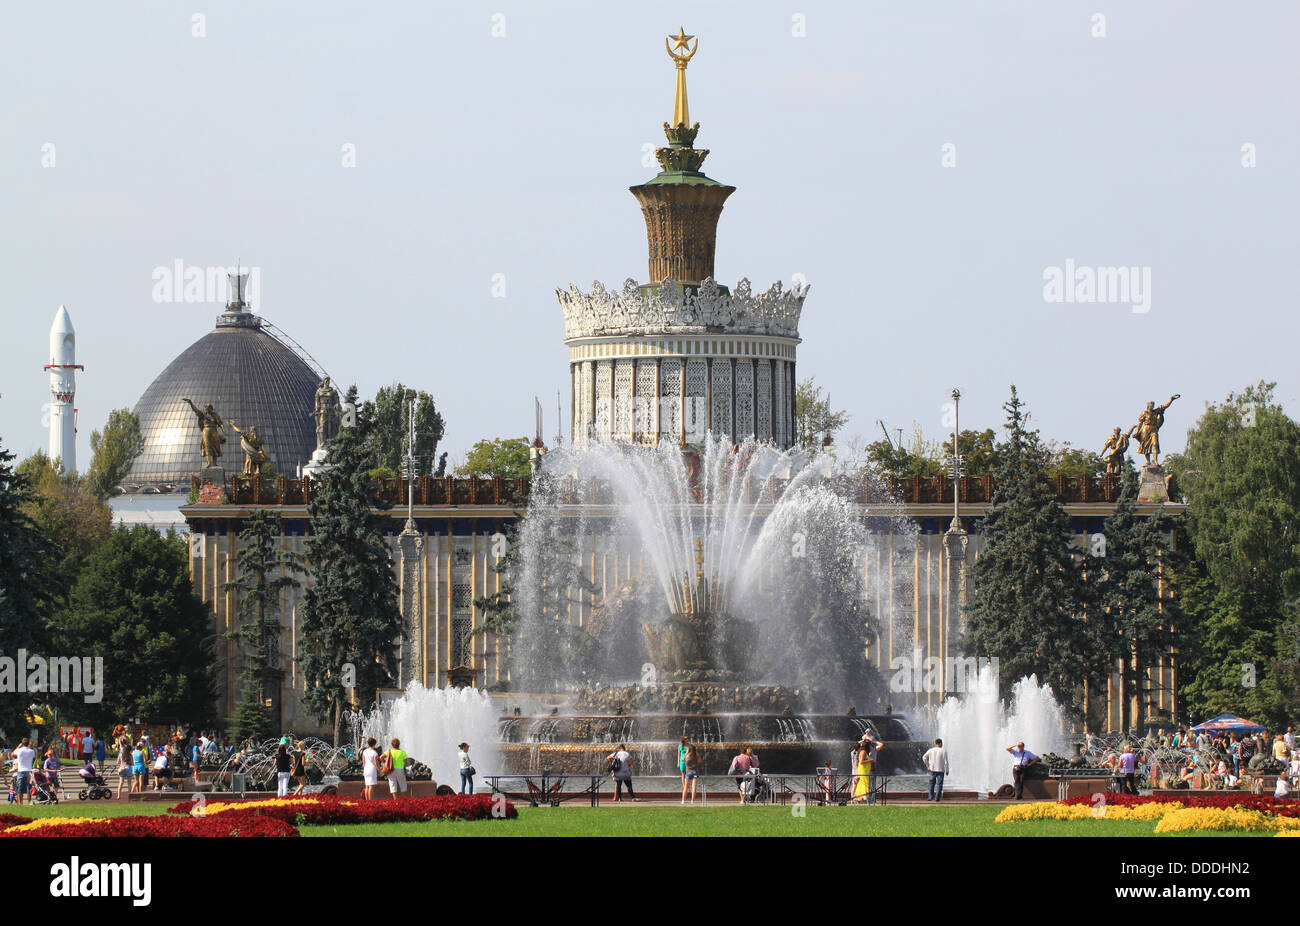 Fountain Stone flower on display in Moscow Stock Photo